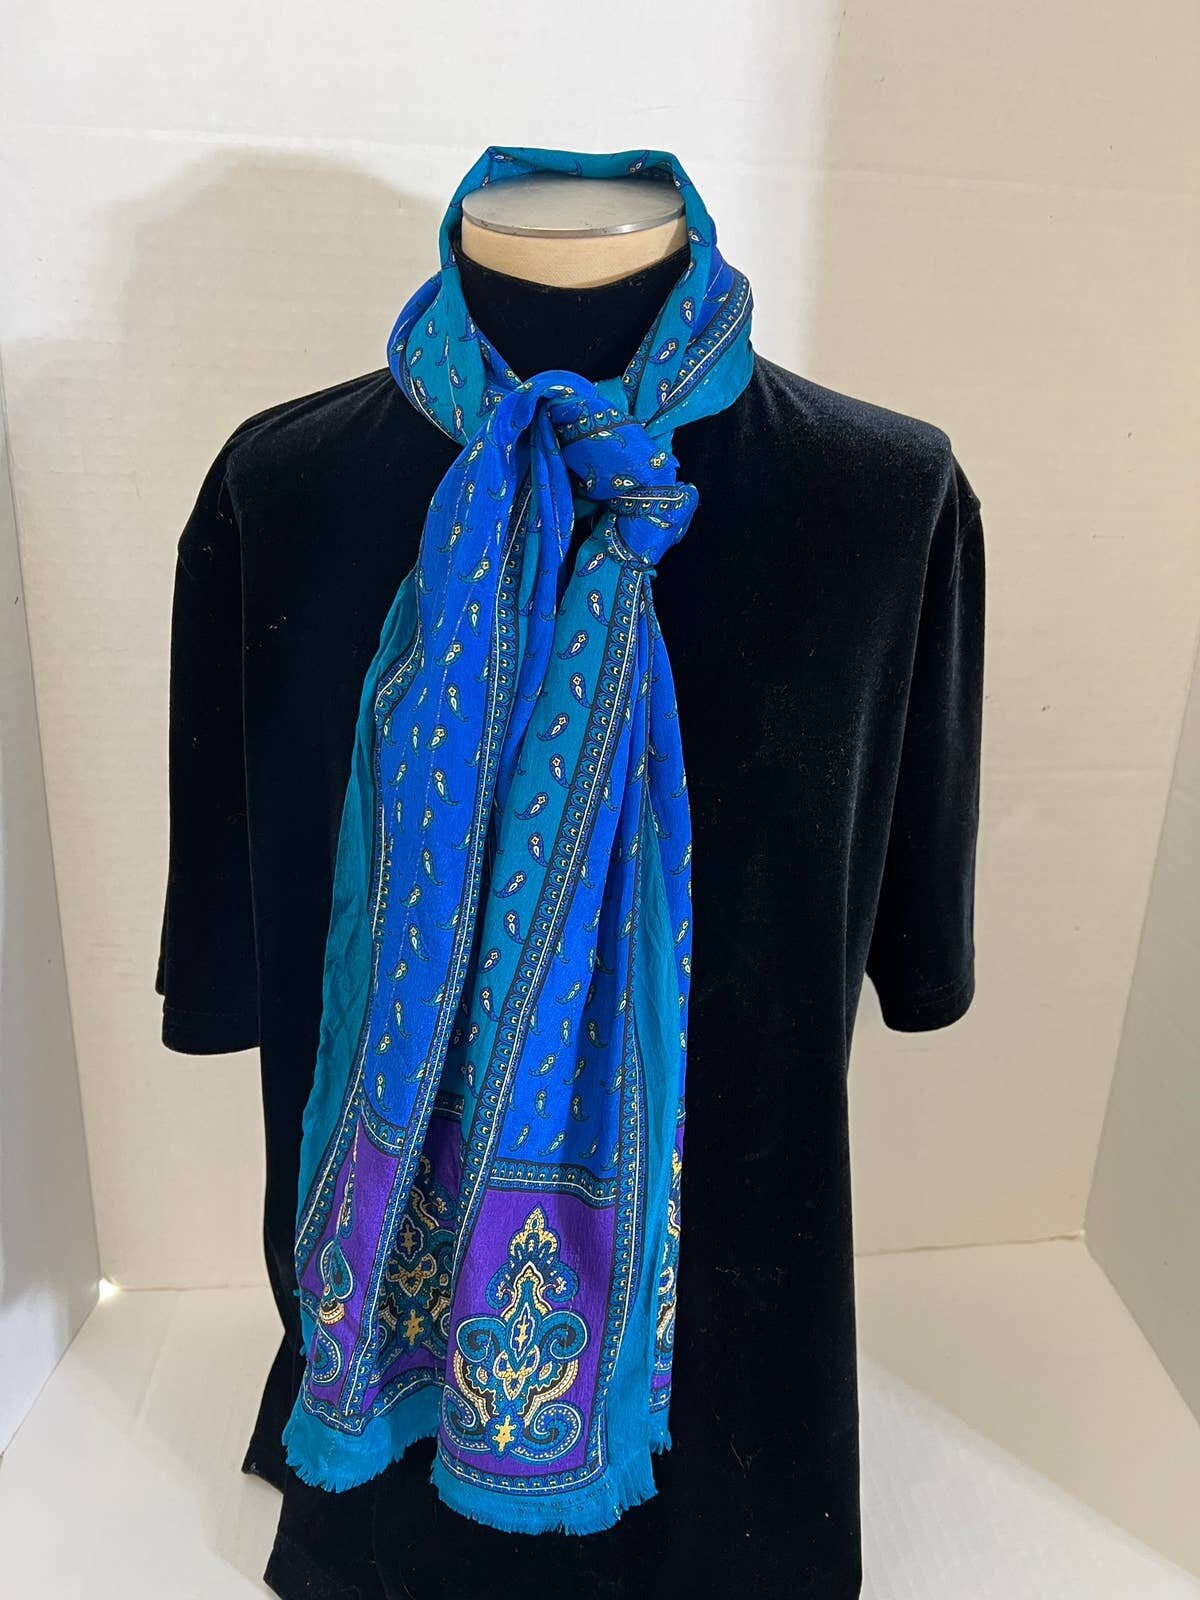 Brushed Silk Scarf - Octopus by Ernest Swanson – Chic Winds